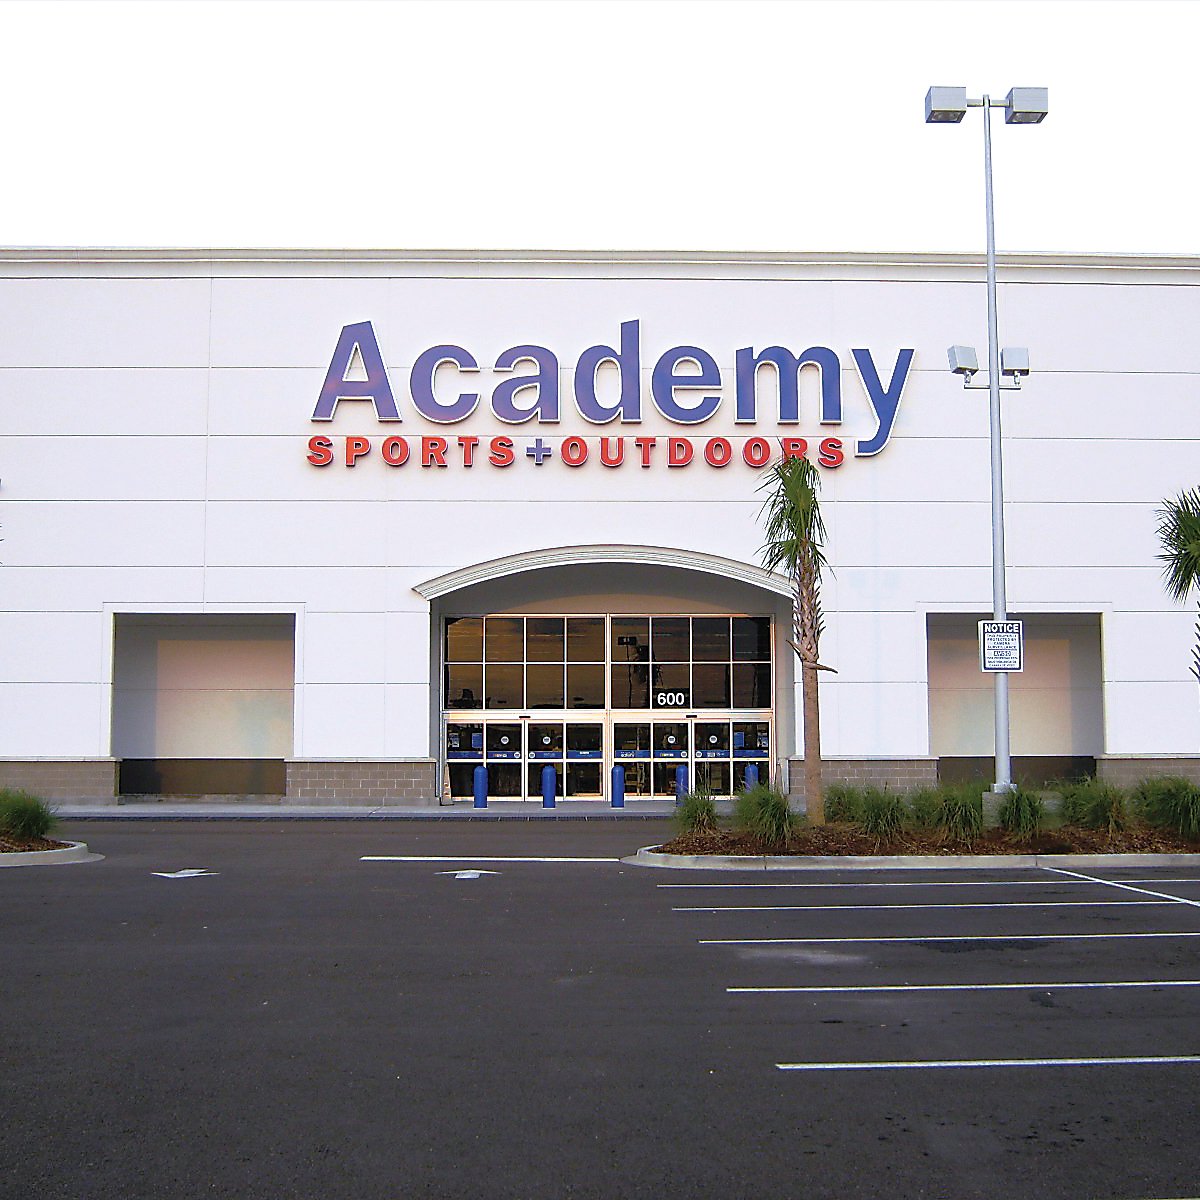 Academy sports and outdoors Locations - Find Nearest Location